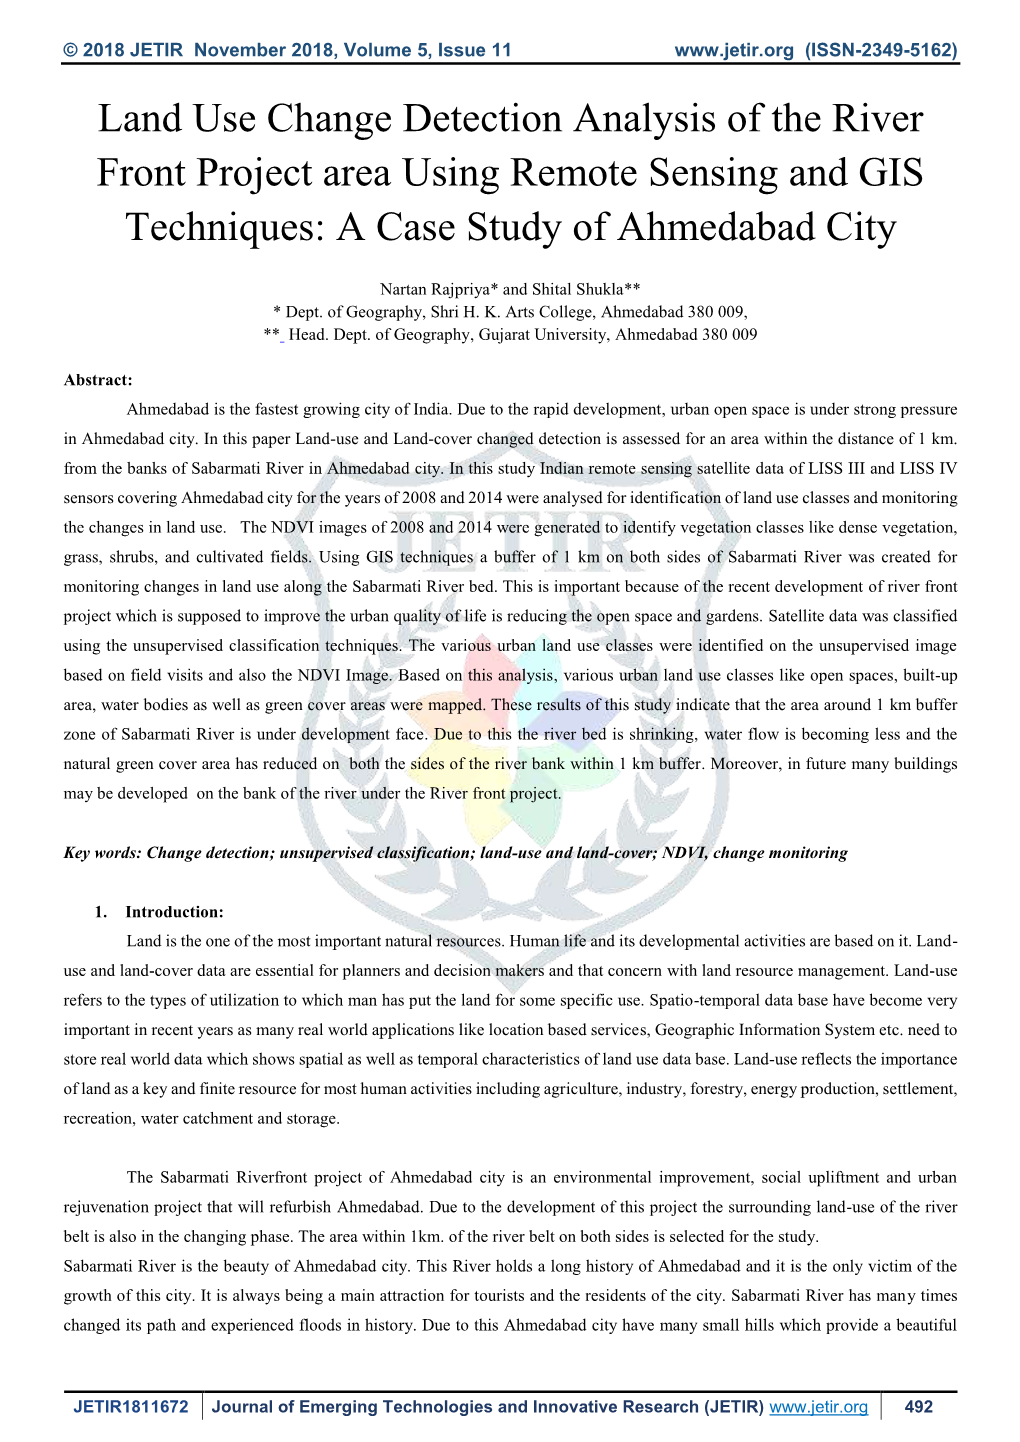 Land Use Change Detection Analysis of the River Front Project Area Using Remote Sensing and GIS Techniques: a Case Study of Ahmedabad City